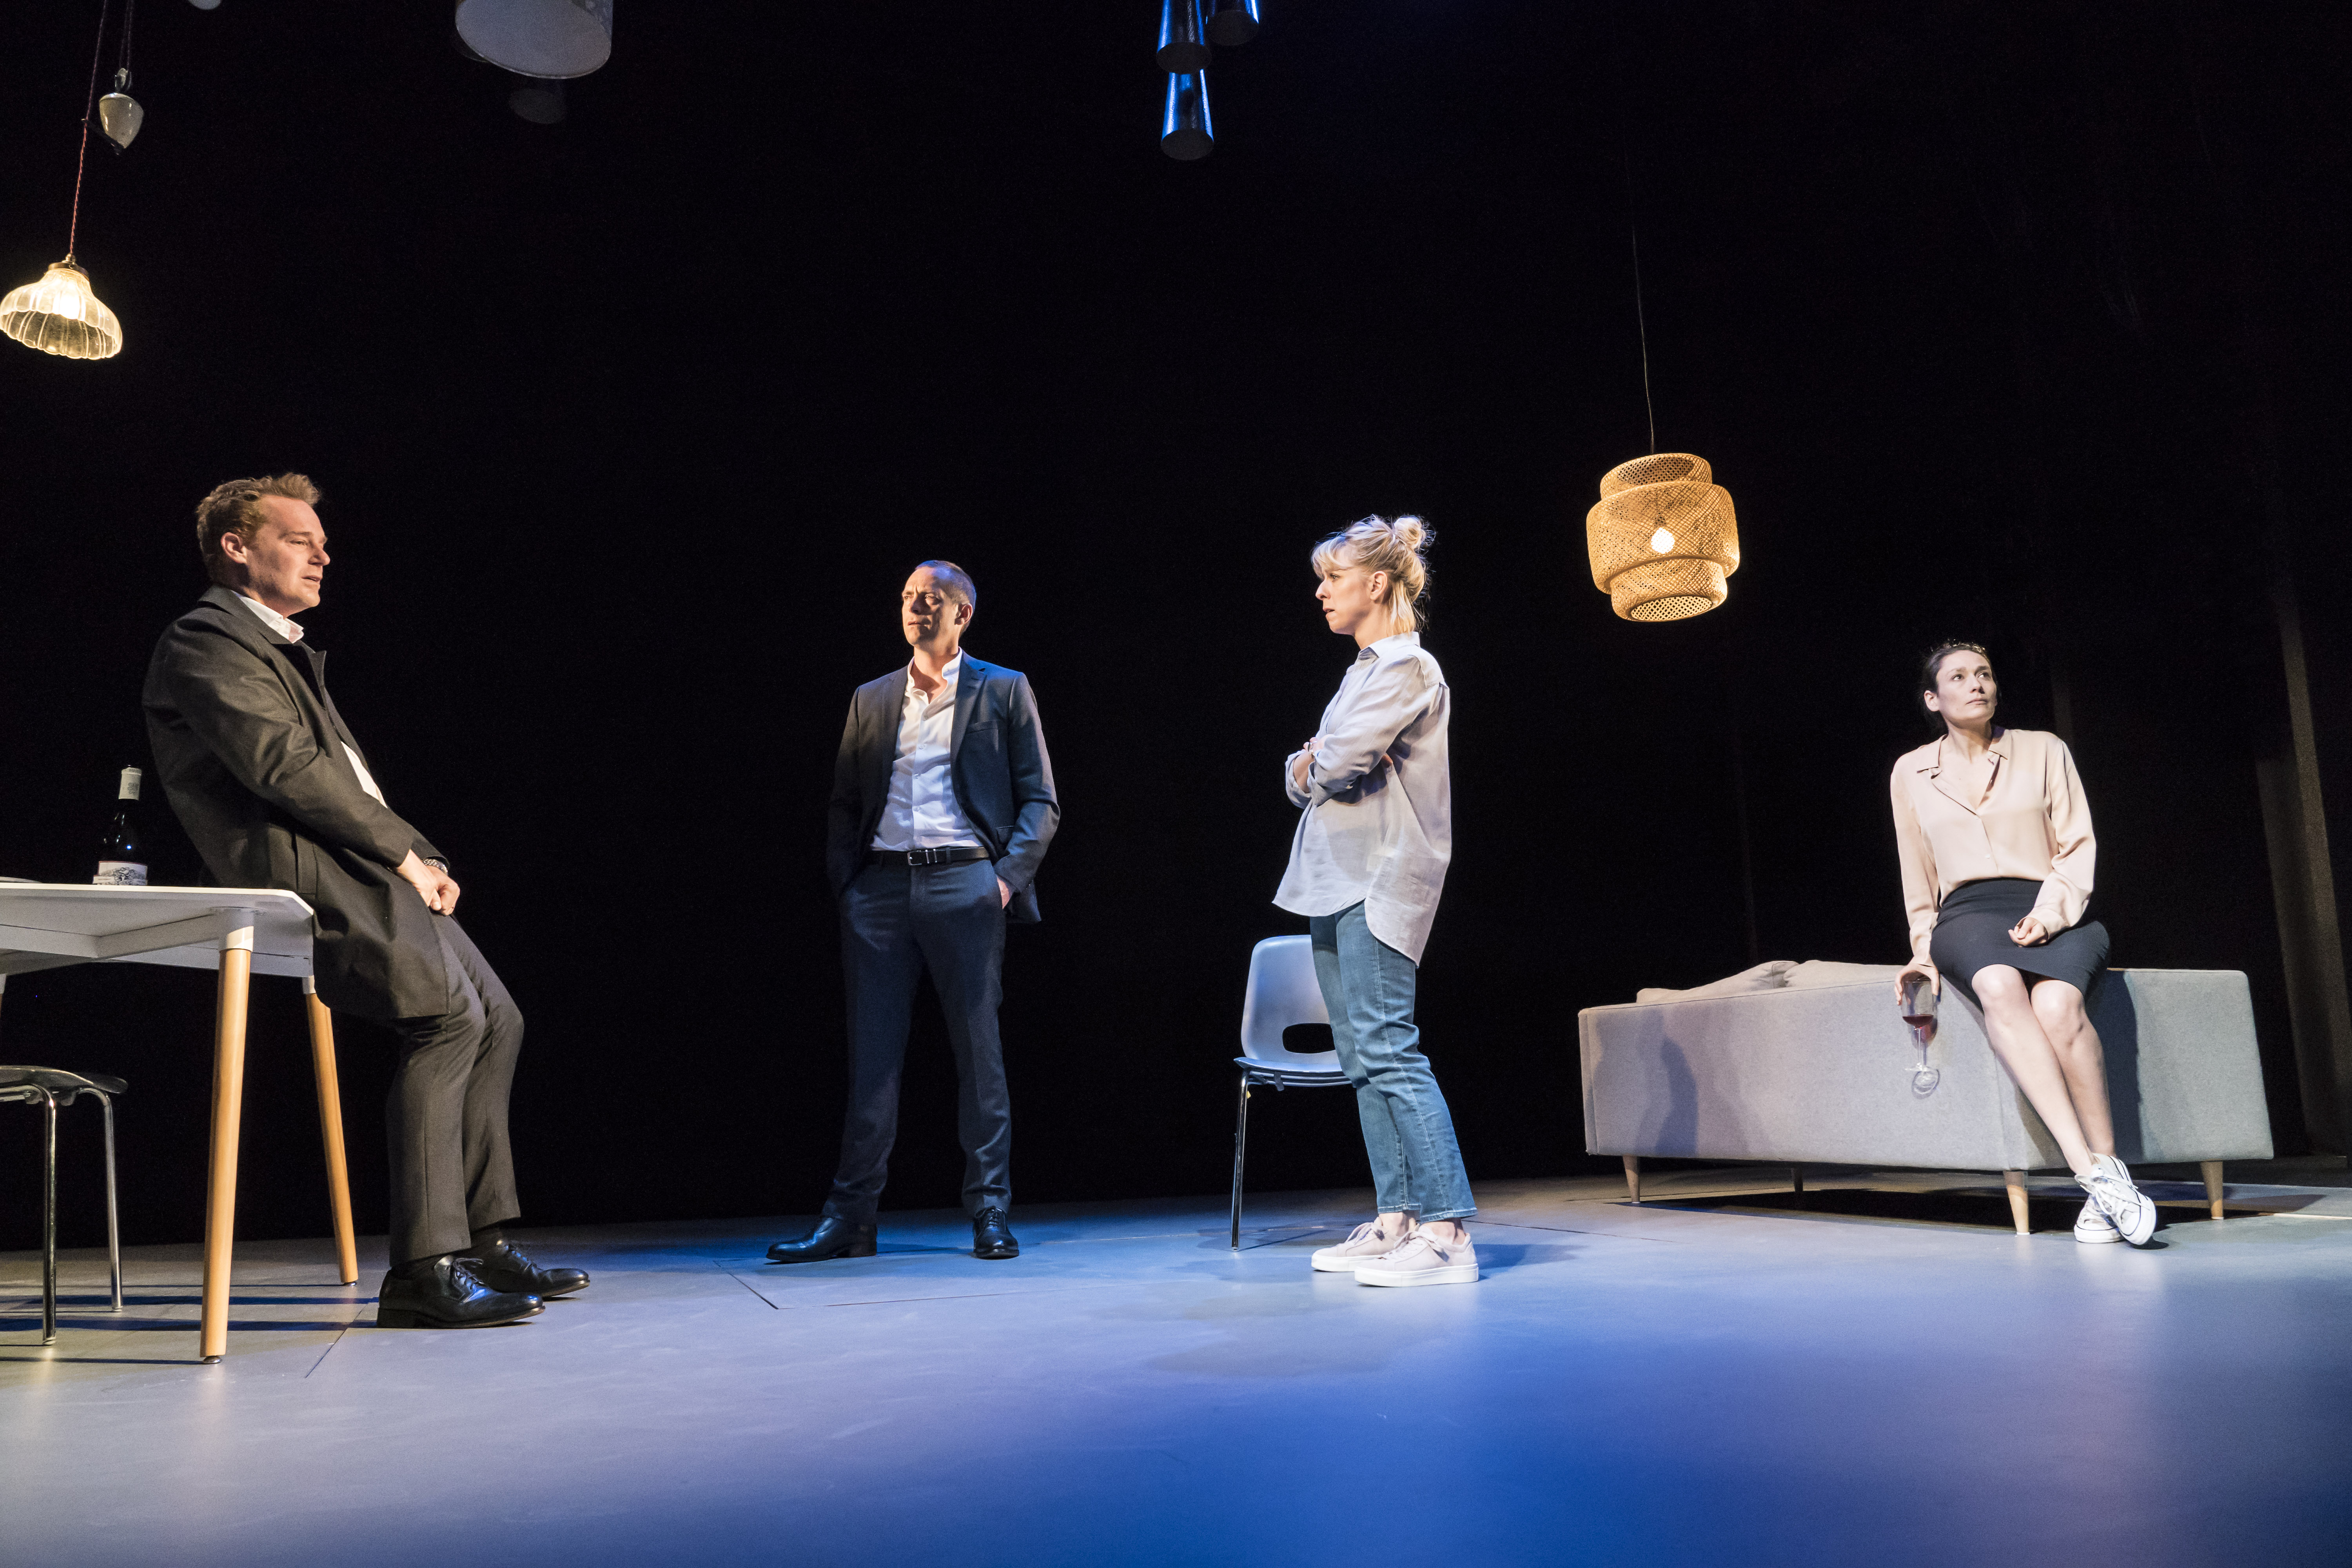 Adam James, Stephen Campbell Moore, Claudie Blakley and Sian Clifford in Consent at the Harold Pinter Theatre